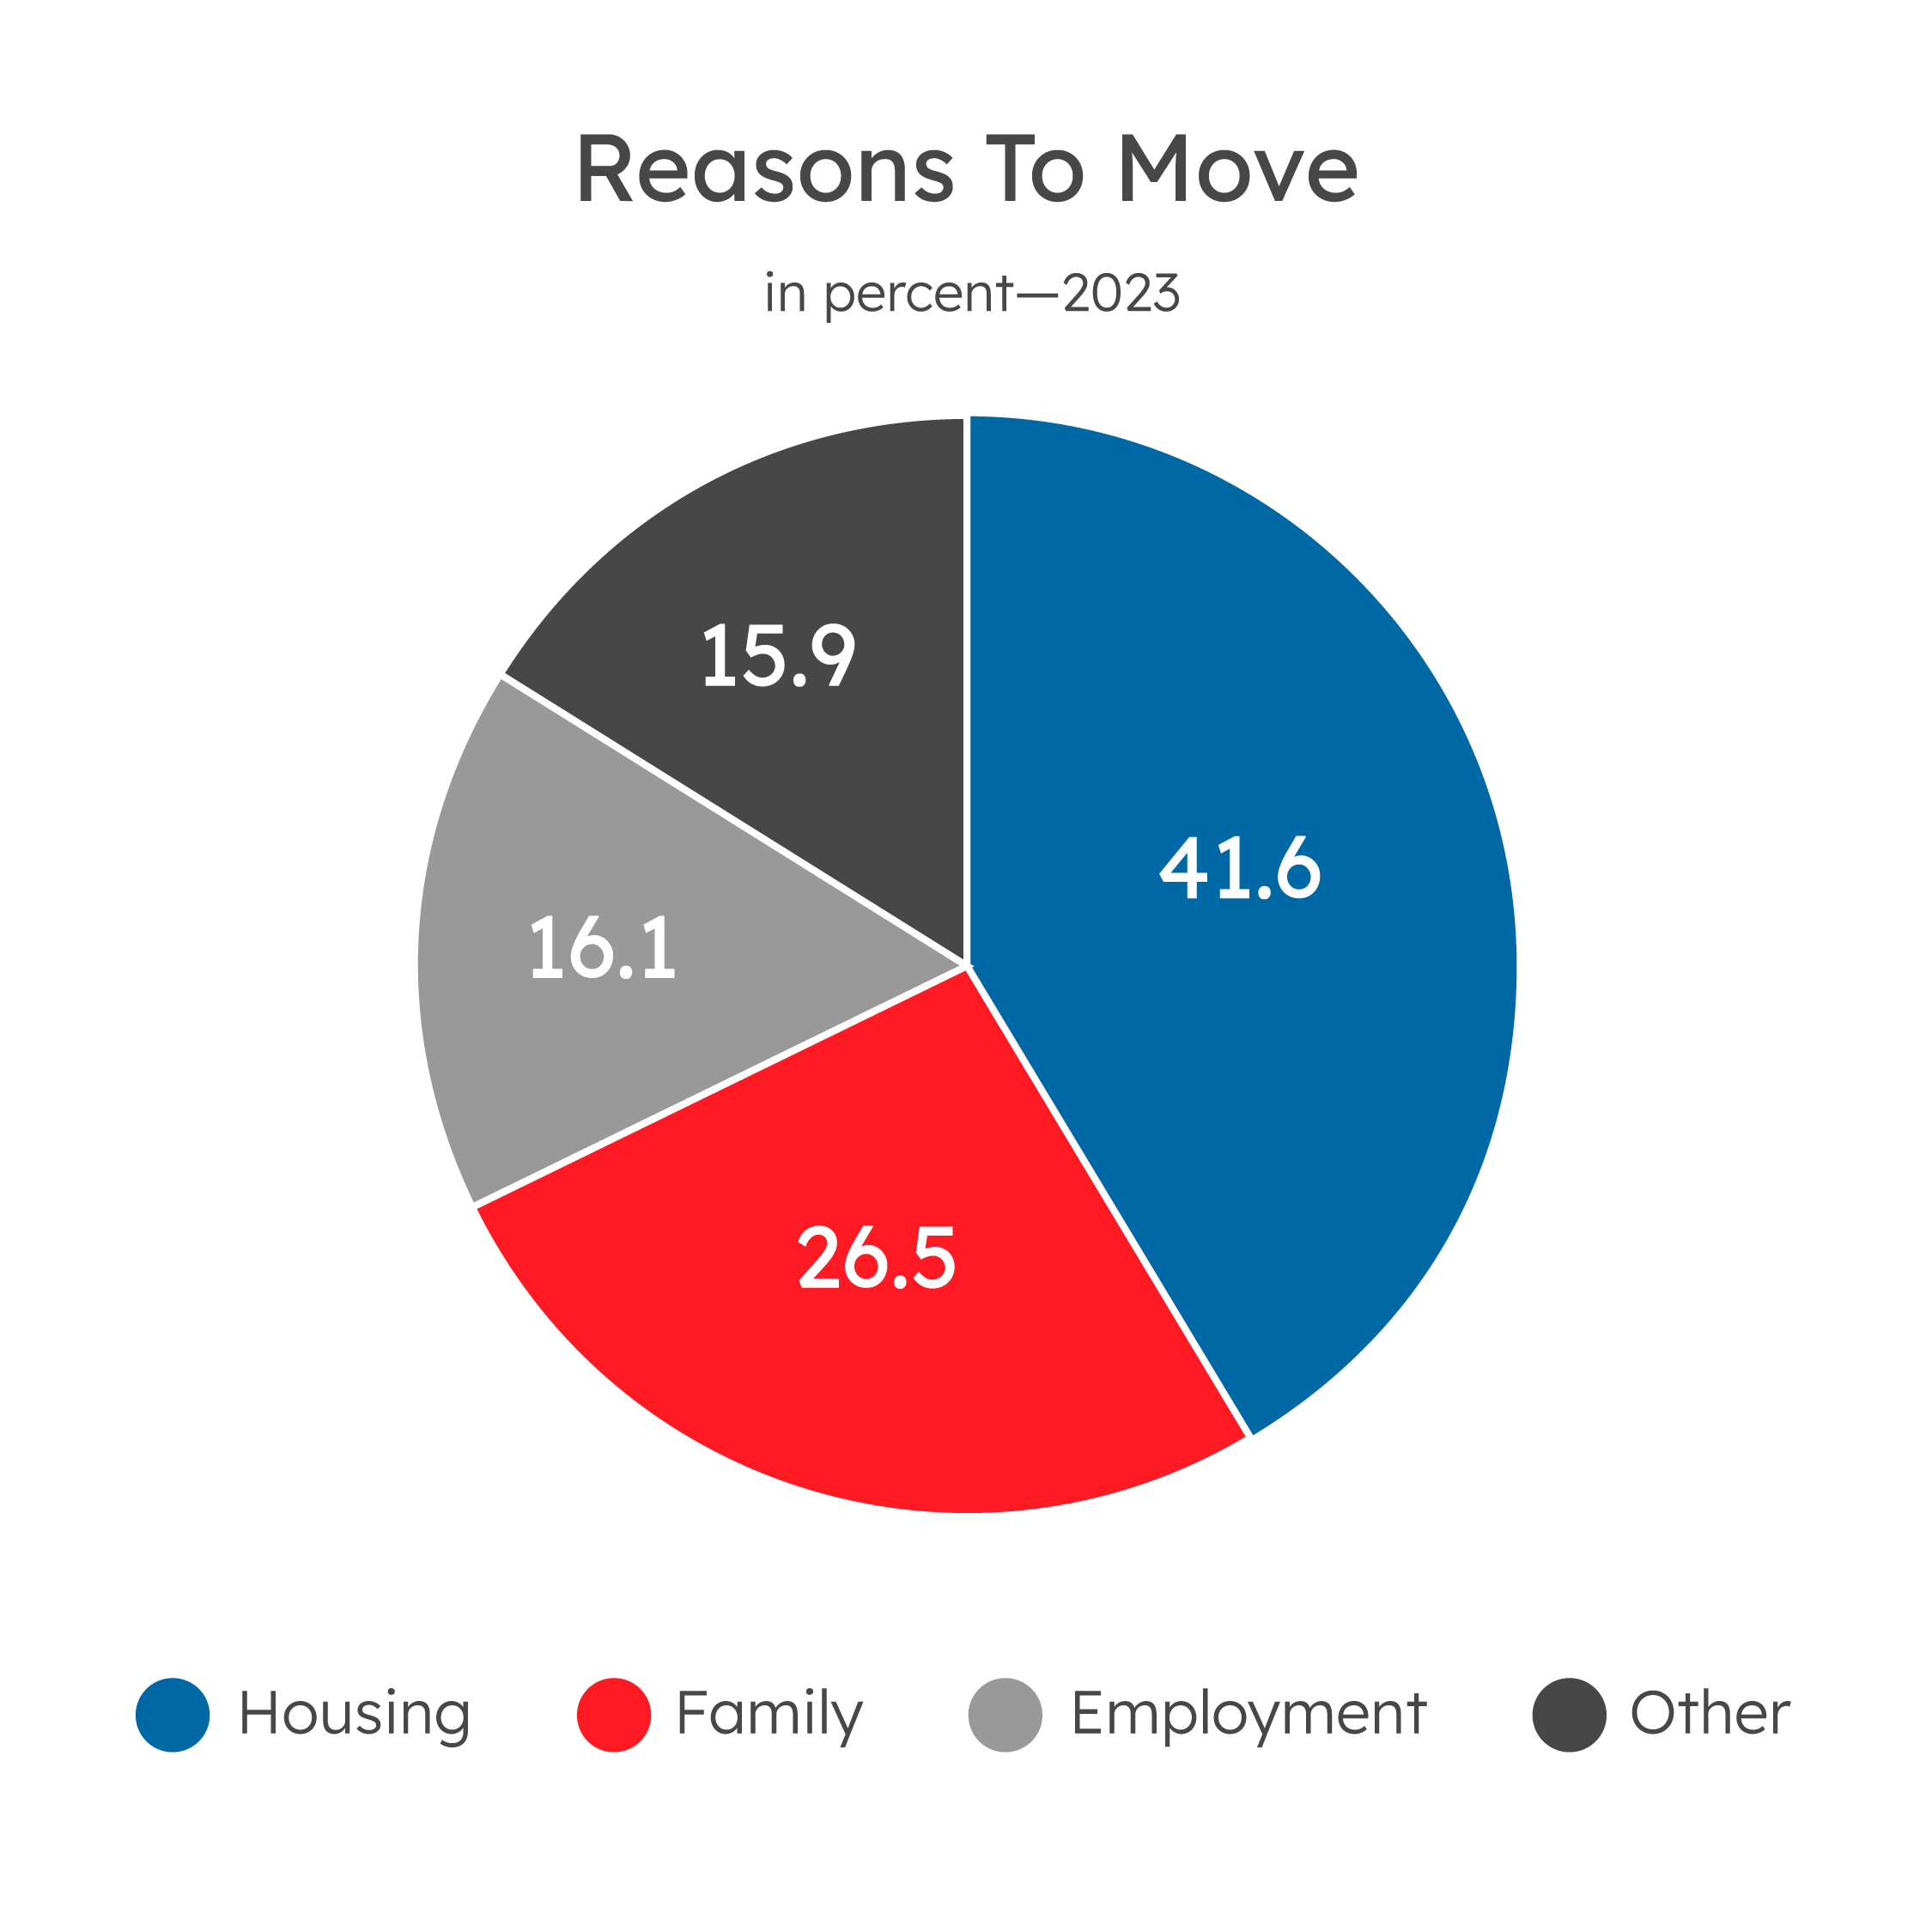 Reasons to Move Housing 41.6%, Family 26.5%, Employment 16.1% and Other 15.9%